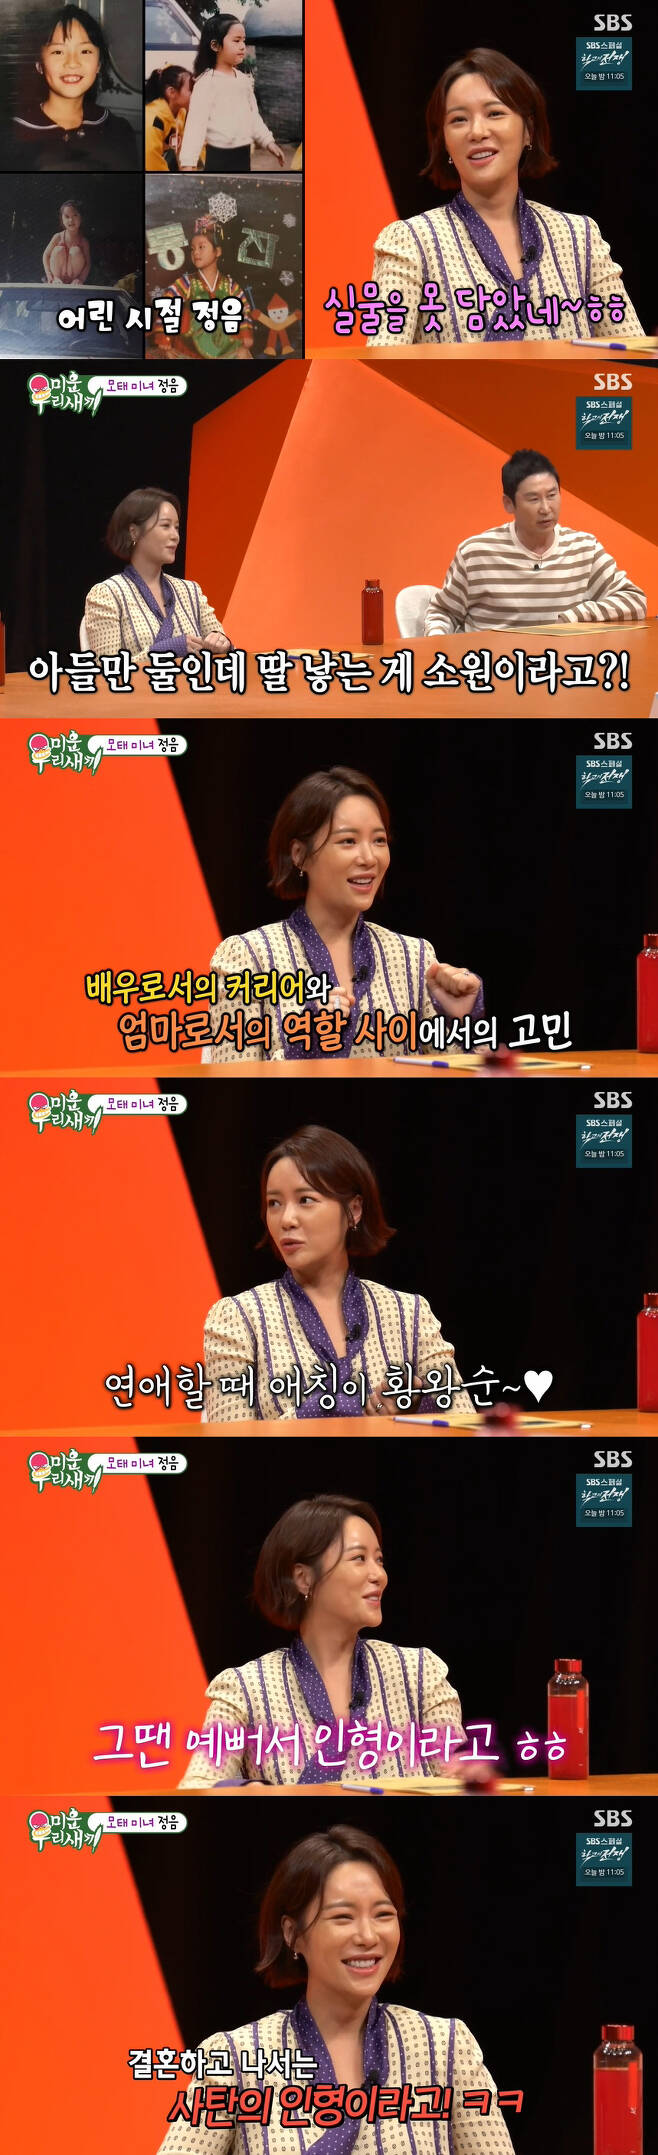 Actor Hwang Jung-eum revealed why he was reunited with Husband during the divorce adjustment.Hwang Jung-eum appeared as a special MC on SBS My Little Old Boy broadcast on the 22nd.On the day, Hwang Jung-eum said, I was married to professional golfer and businessman Lee Young-don in 10 months of love, he said. At that time, the pods seemed to be perfect from head to toe.Hwang Jung-eum, who has been married for eight years in 2016, has never seen Husband look good and has never had a heartbreaking moment.Even the biggest regret in life was marriage, which surprised me.Movengers said, I liked it all at the time of my honeymoon, but now that I have lived for eight years, I do not have it anymore. Hwang Jung-eum said, It seems like life is like living.Isnt it kind of amazing that theres nothing (that I like)? she said, laughing.On the other hand, Hwang Jung-eum, who reported on the divorce adjustment in 2020, was surprised to confess that he talked to his parents the day before the divorce article.Regarding the reaction of the family members, he said, I told my family that there will be a divorce article in the group chat room, so dont be surprised, and what was so shocking was that my father said, Im more worried about this West, and he was worried about Husband, not me.Hwang Jung-eum, who overcame the crisis in a year and chose to reunite instead of divorce, said, But Husband is careful of the behavior I hated in the past, and I still feel like I have a heart.Hwang Jung-eum, a mother of two children, smiled as soon as the story about her son came out, saying, It is so beautiful. Then, photos of her two sons were released, and Shin Dong-yeop admired, It is hard to look like that since childhood.Hwang Jung-eum said that the names of the two sons were Wang-sik, a steel type, and that they rejoined and then gave birth to a steel type, while Seo Jang-hoon said, Its a rare name these days.Who built it? Hwang Jung-eum replied, Husband thinks that he does not want to build it like a name these days.On the day of the broadcast, a childhood photo of Hwang Jung-eum, a mother-in-law who was famous in the neighborhood because she was pretty from birth, was released.The Movengers praised it as pretty, and Hwang Jung-eum nodded, saying, I did not have the real thing.Hwang Jung-eum, who gives birth to a daughter, said, Its the biggest problem of my life. Ive been working hard, so Im really worried about whether I should start now as an actress or go back and give birth to a daughter.Seo Jang-hoon, who heard that Hwang Jung-eums two sons names were Wang-sik and steel type, asked, What is your daughters name wang shunyi?Hwang Jung-eum said, My nickname is wang shunyi. When I was in a relationship, my nickname was Hwang Wang-soon. So when I had a daughter, I wanted to use wang shunyi. So my mother asked me, Is this a frog family?Hwang Jung-eum, who was called a doll by Husband before the marriage, said, At that time, I thought it was called a doll because it was pretty. But after marriage, it was called Satans doll.